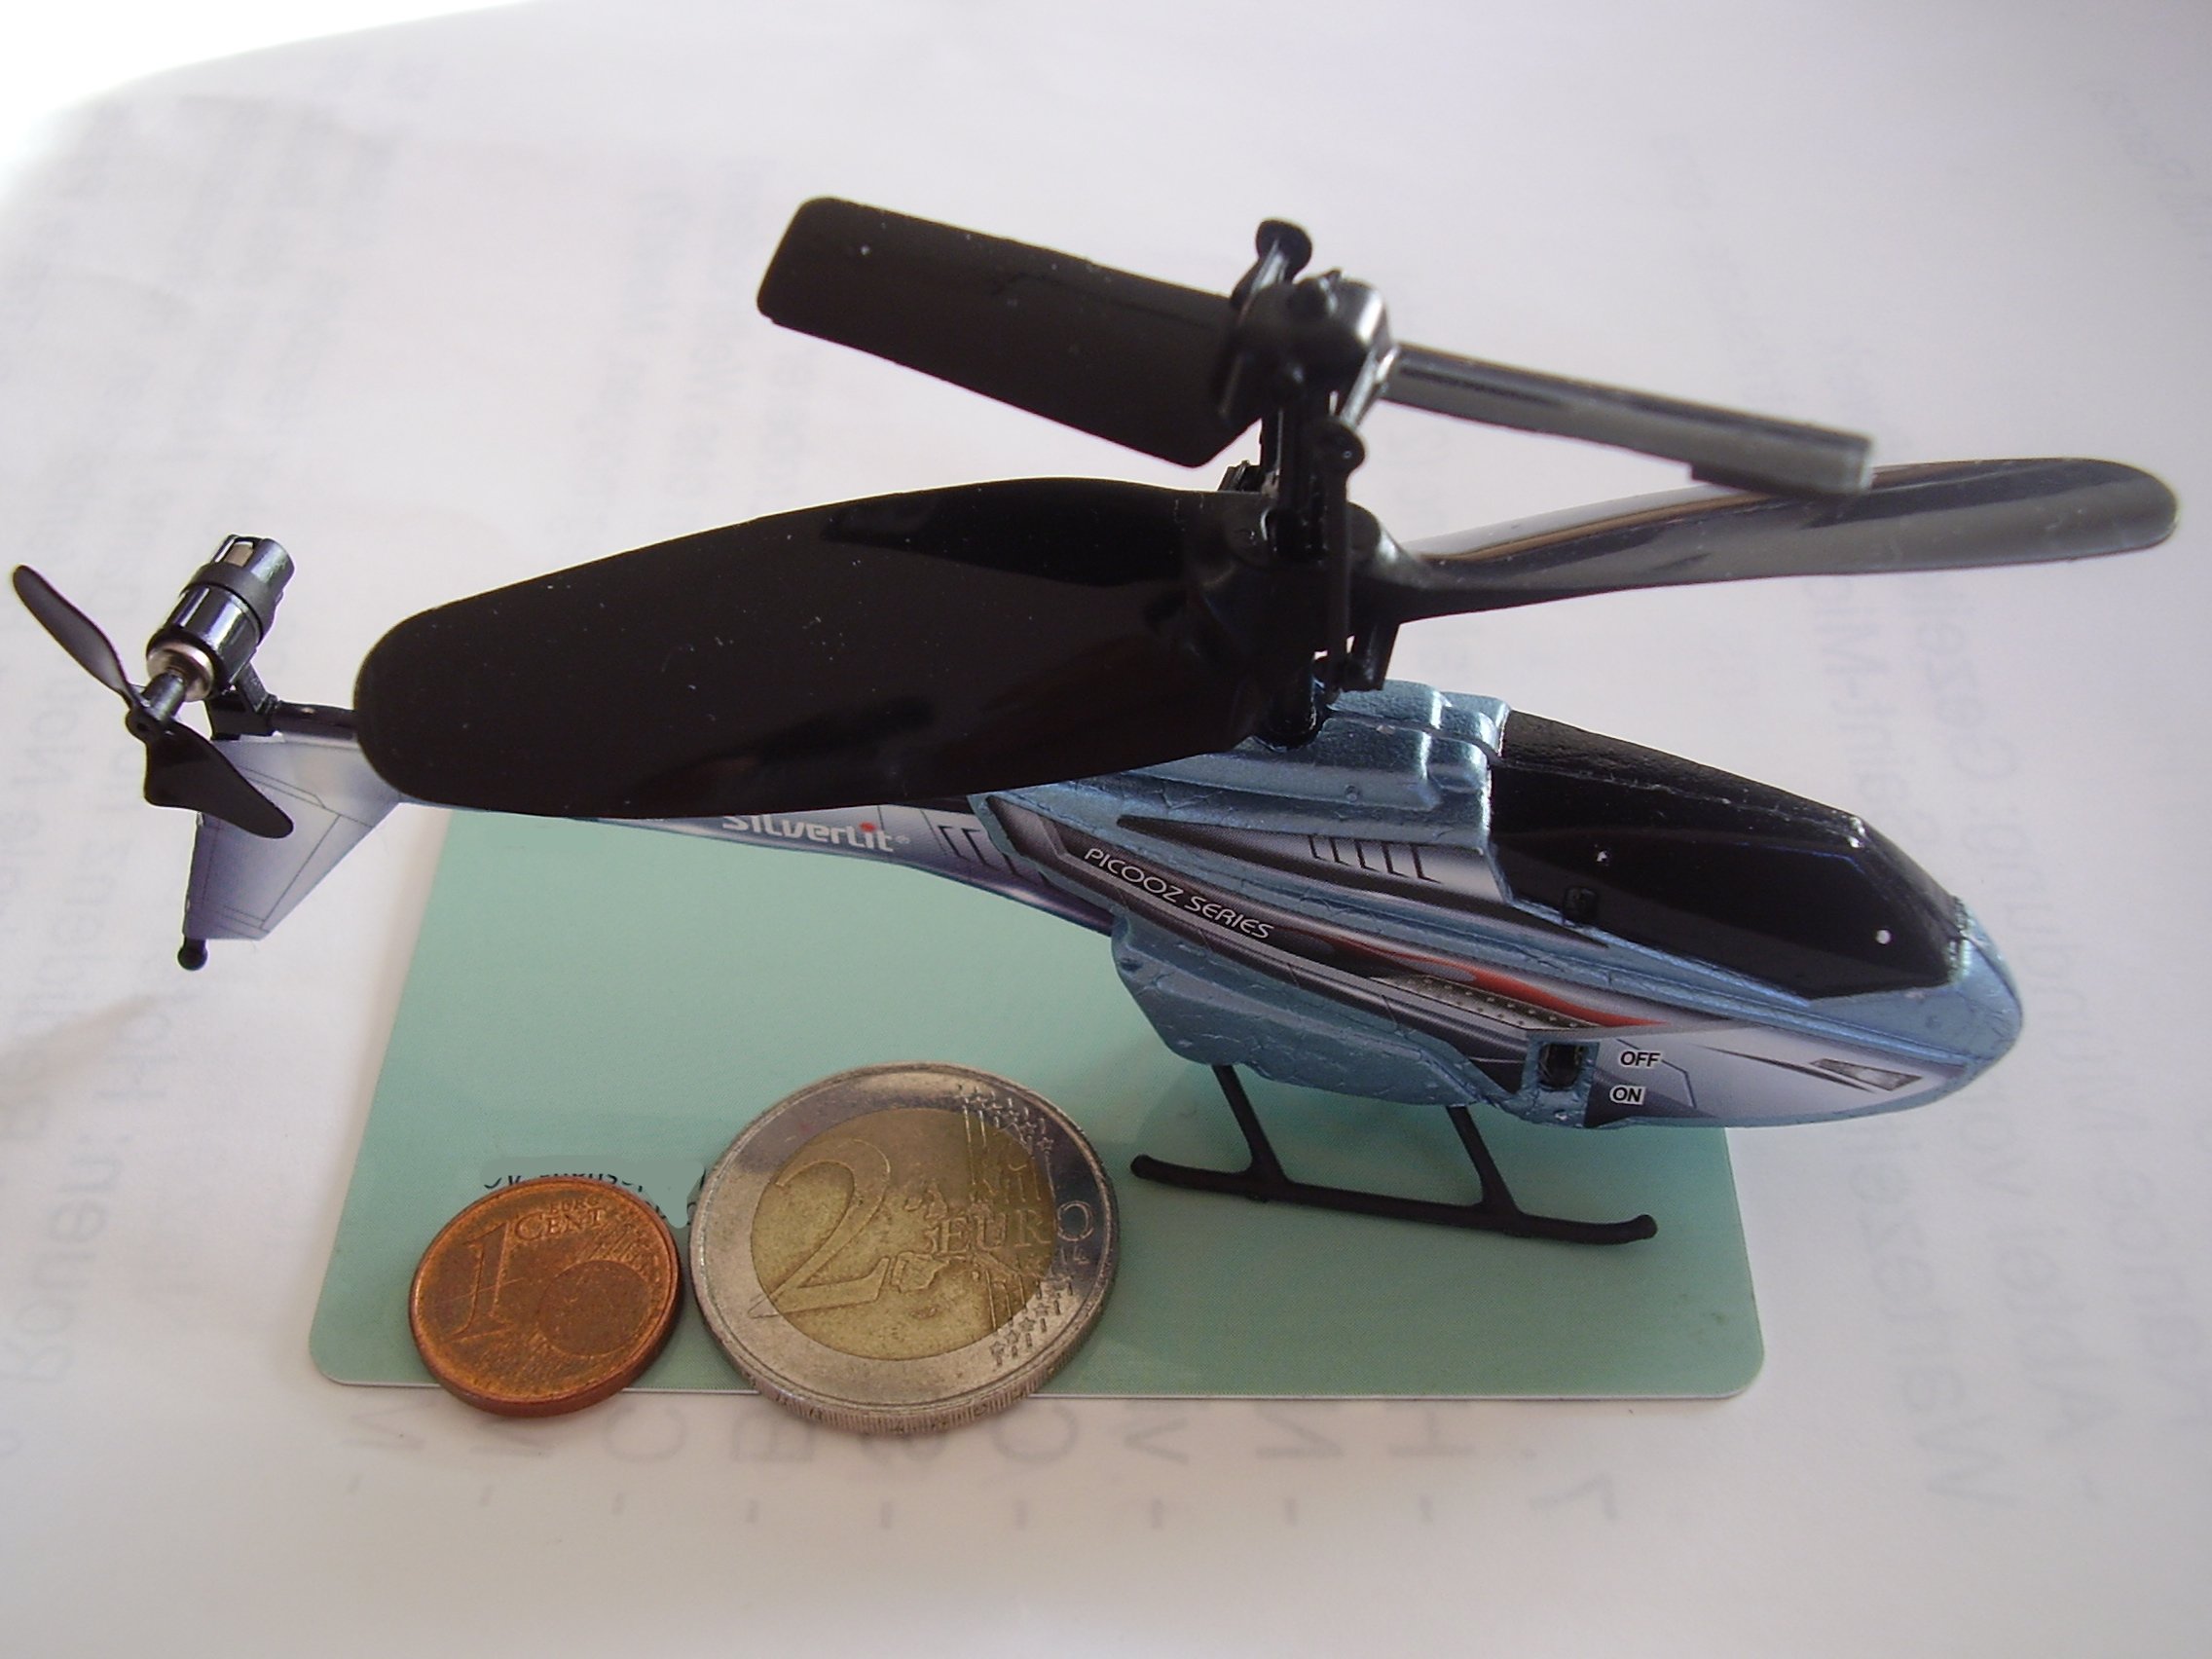 Silverlit MX-1 Model Helicopter PicooZ Serie 2008 PD 02